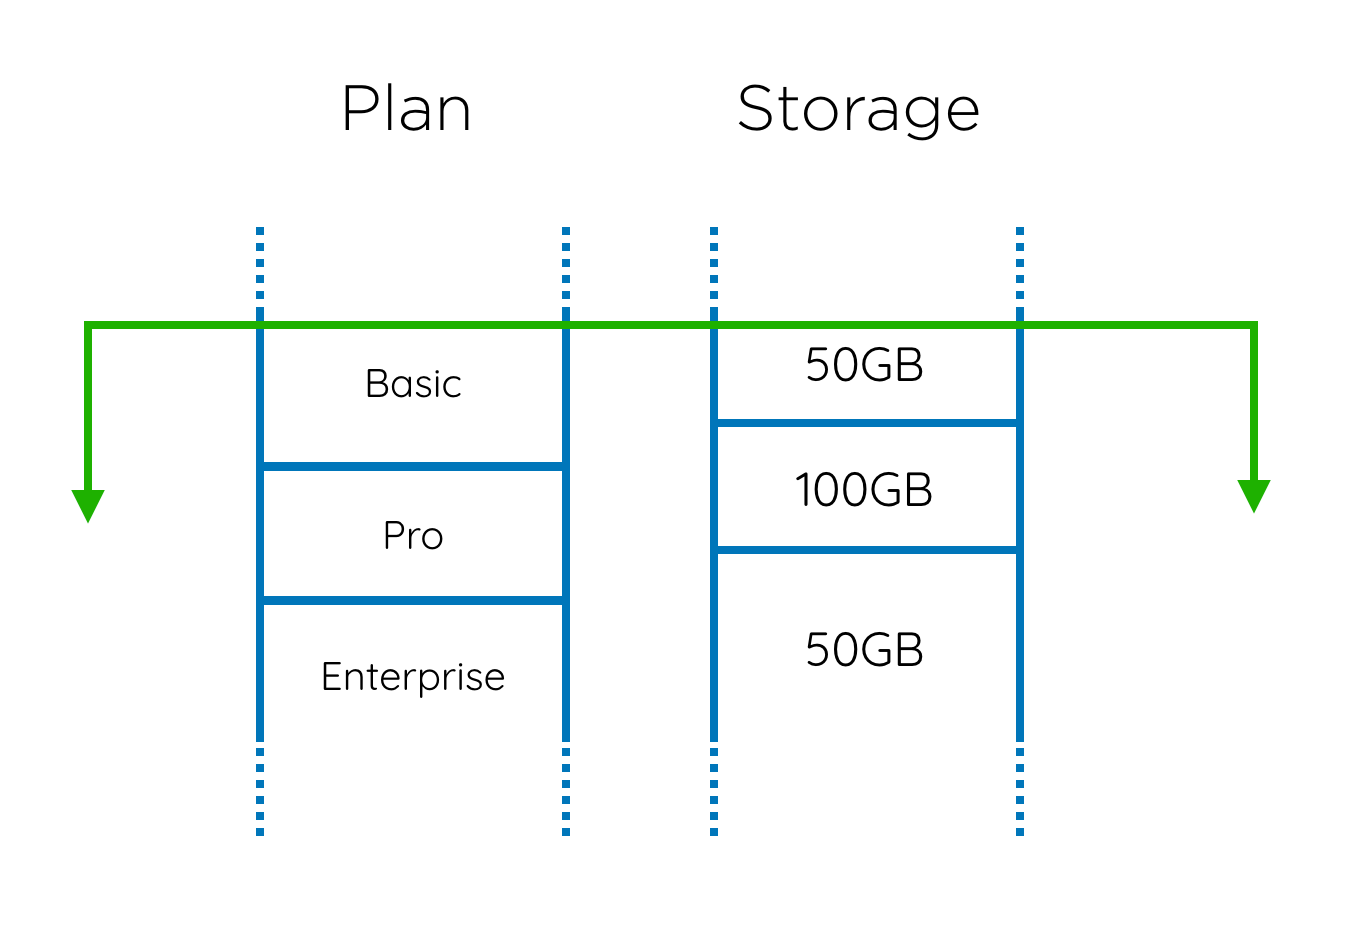 Overlapping plans and storage volumes